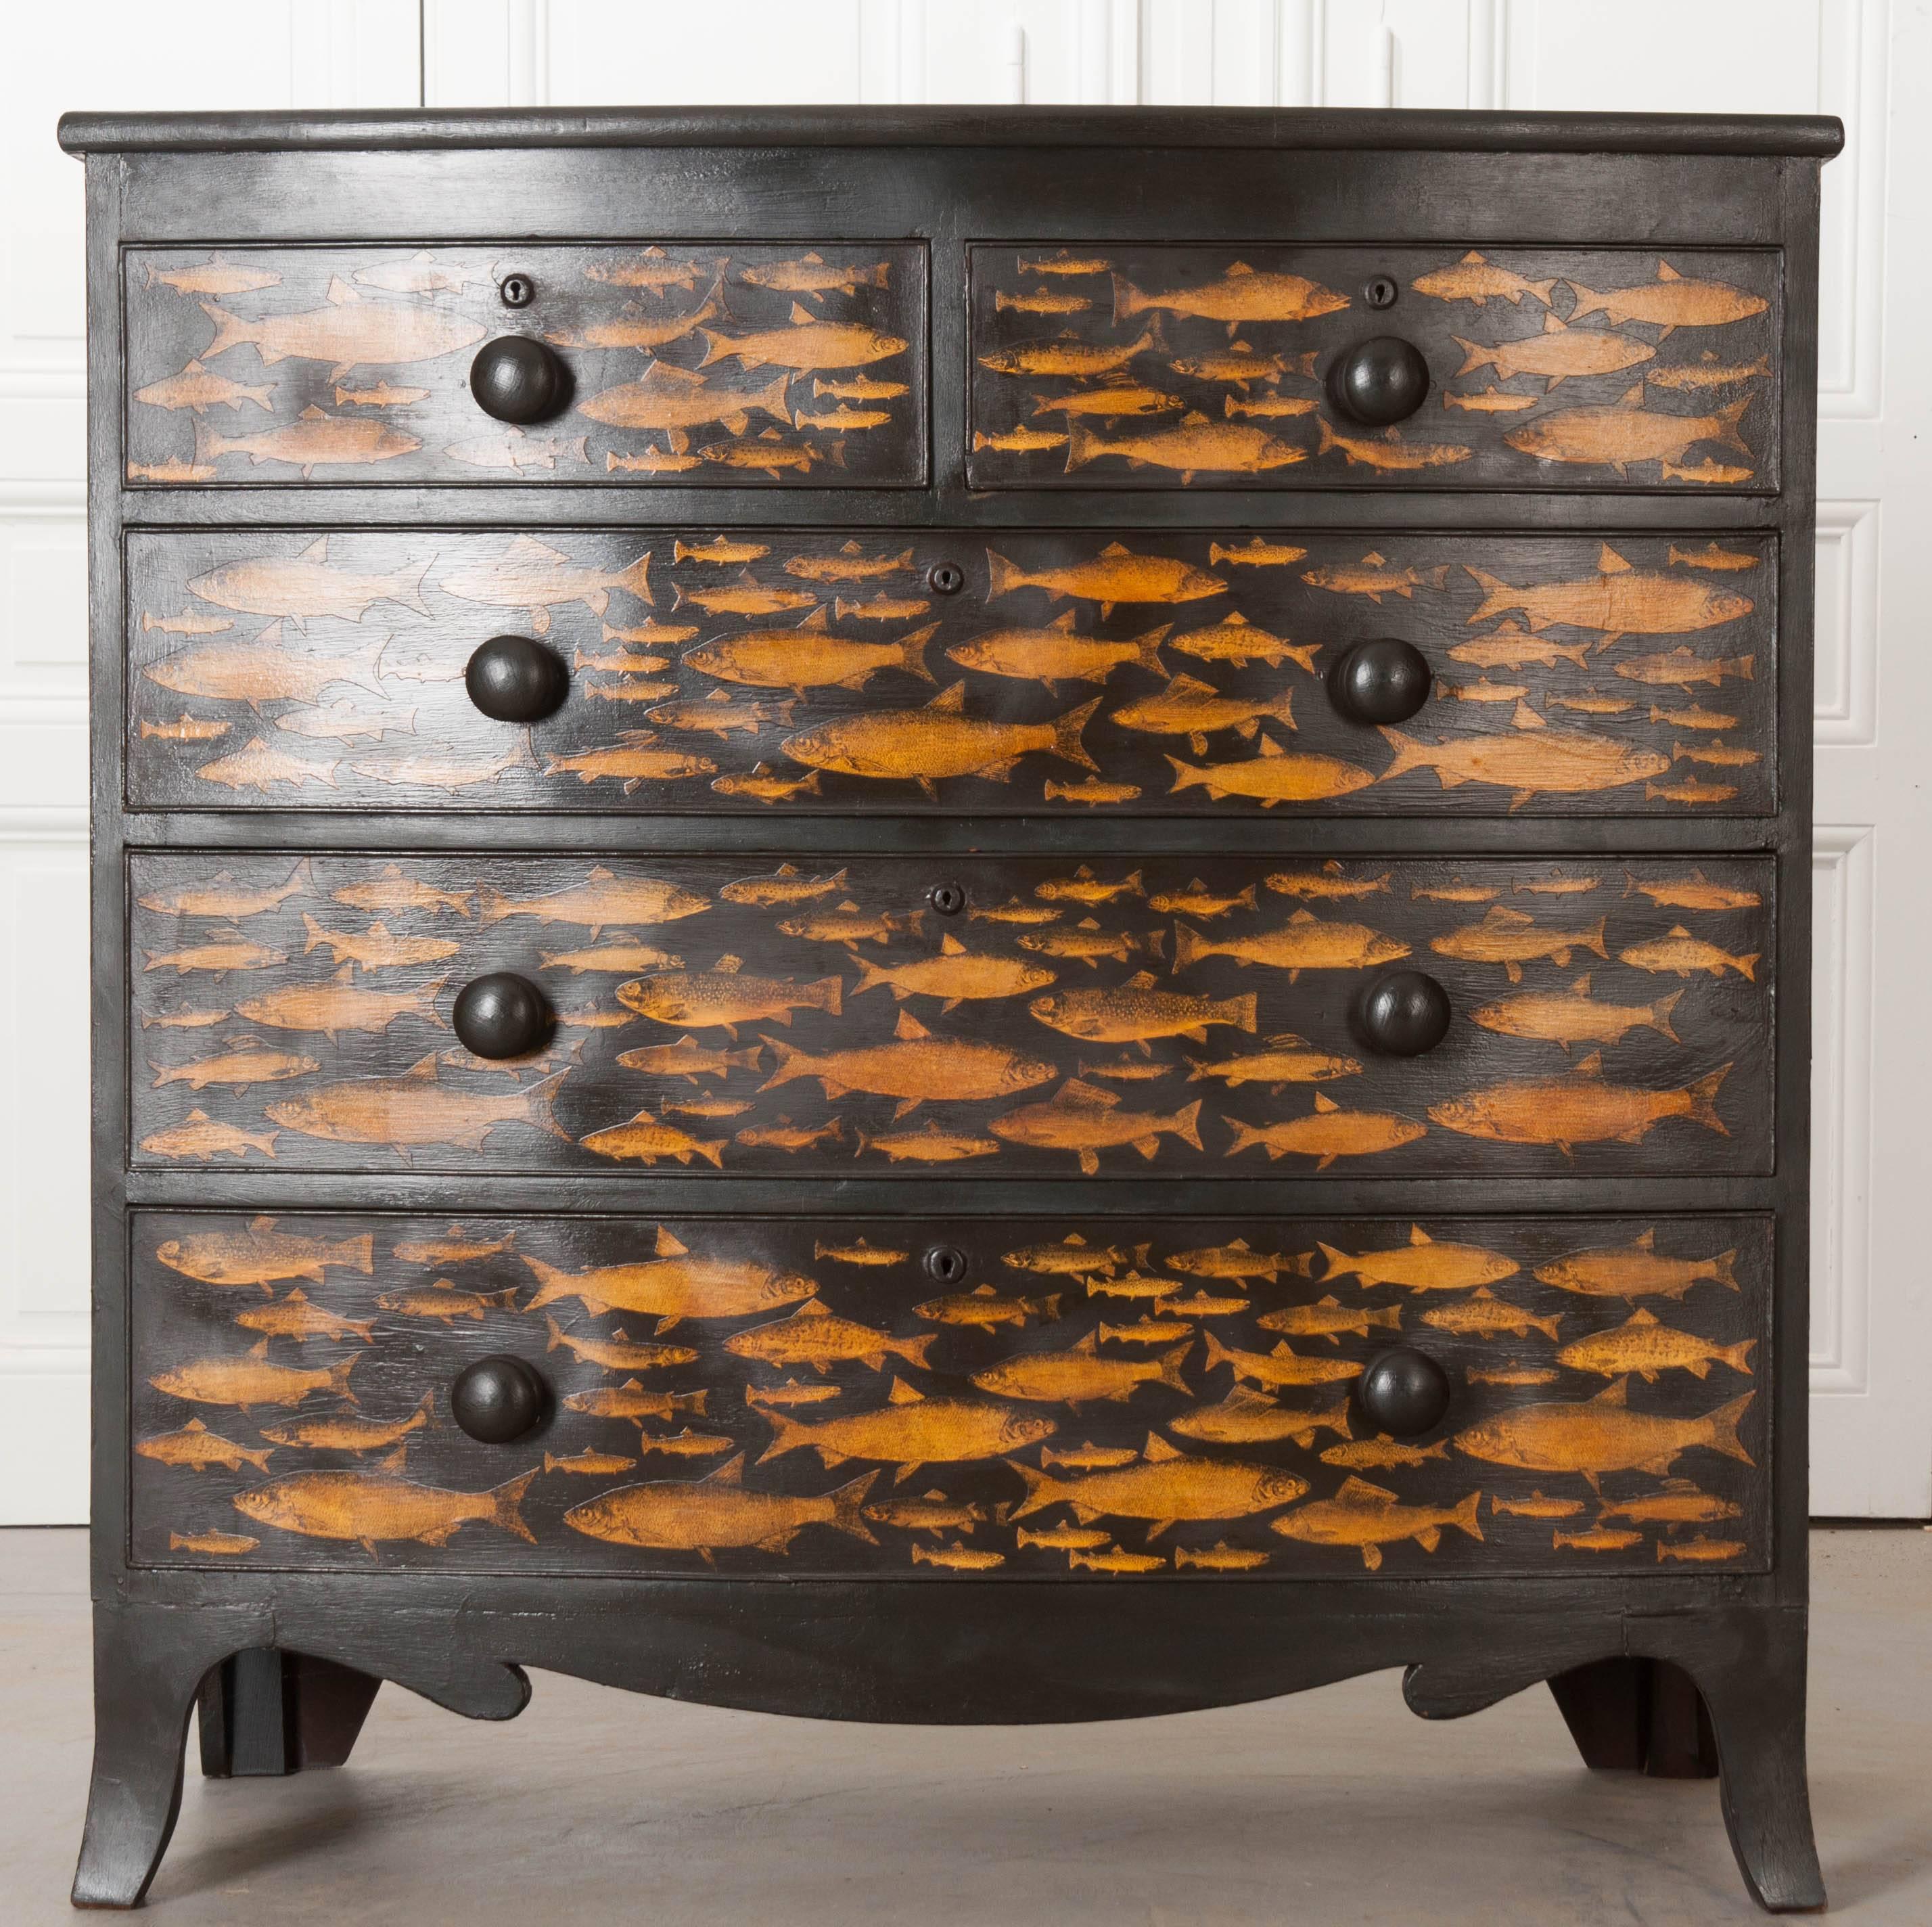 A bow-front, découpage and painted five-drawer chest of drawers from 19th century England. The chest has more recently had wonderful gold fish decoupaged onto the piece. Each drawer has turned, wooden knobs that have also been painted black. The